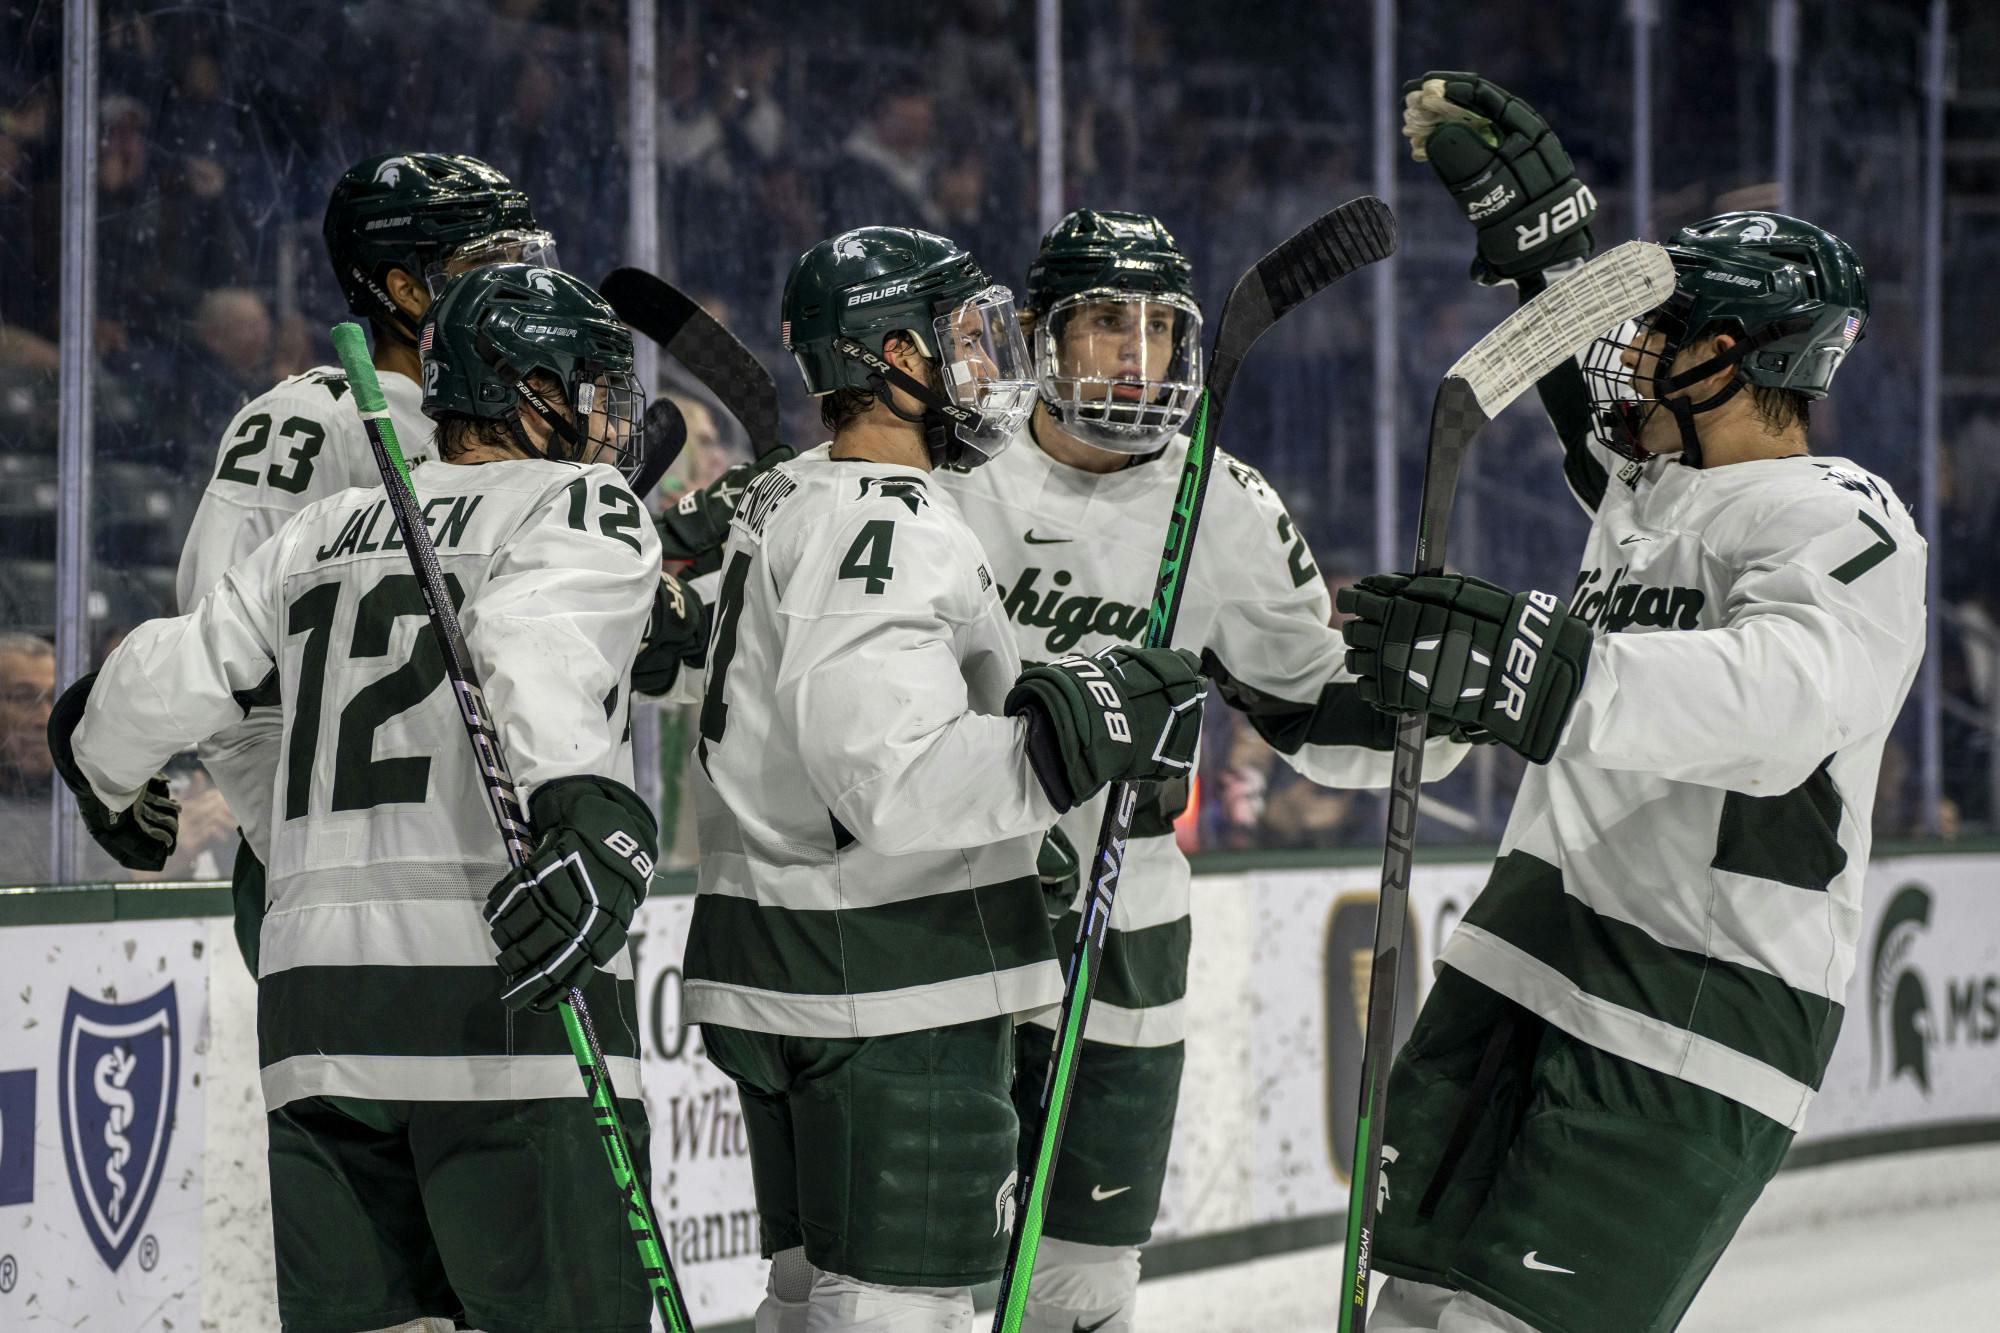 <p>Spartans celebrate a goal during a game of hockey between MSU and Long Island University at Munn Ice Arena in East Lansing on Oct. 21, 2022. The Spartans won, 3-1.</p>